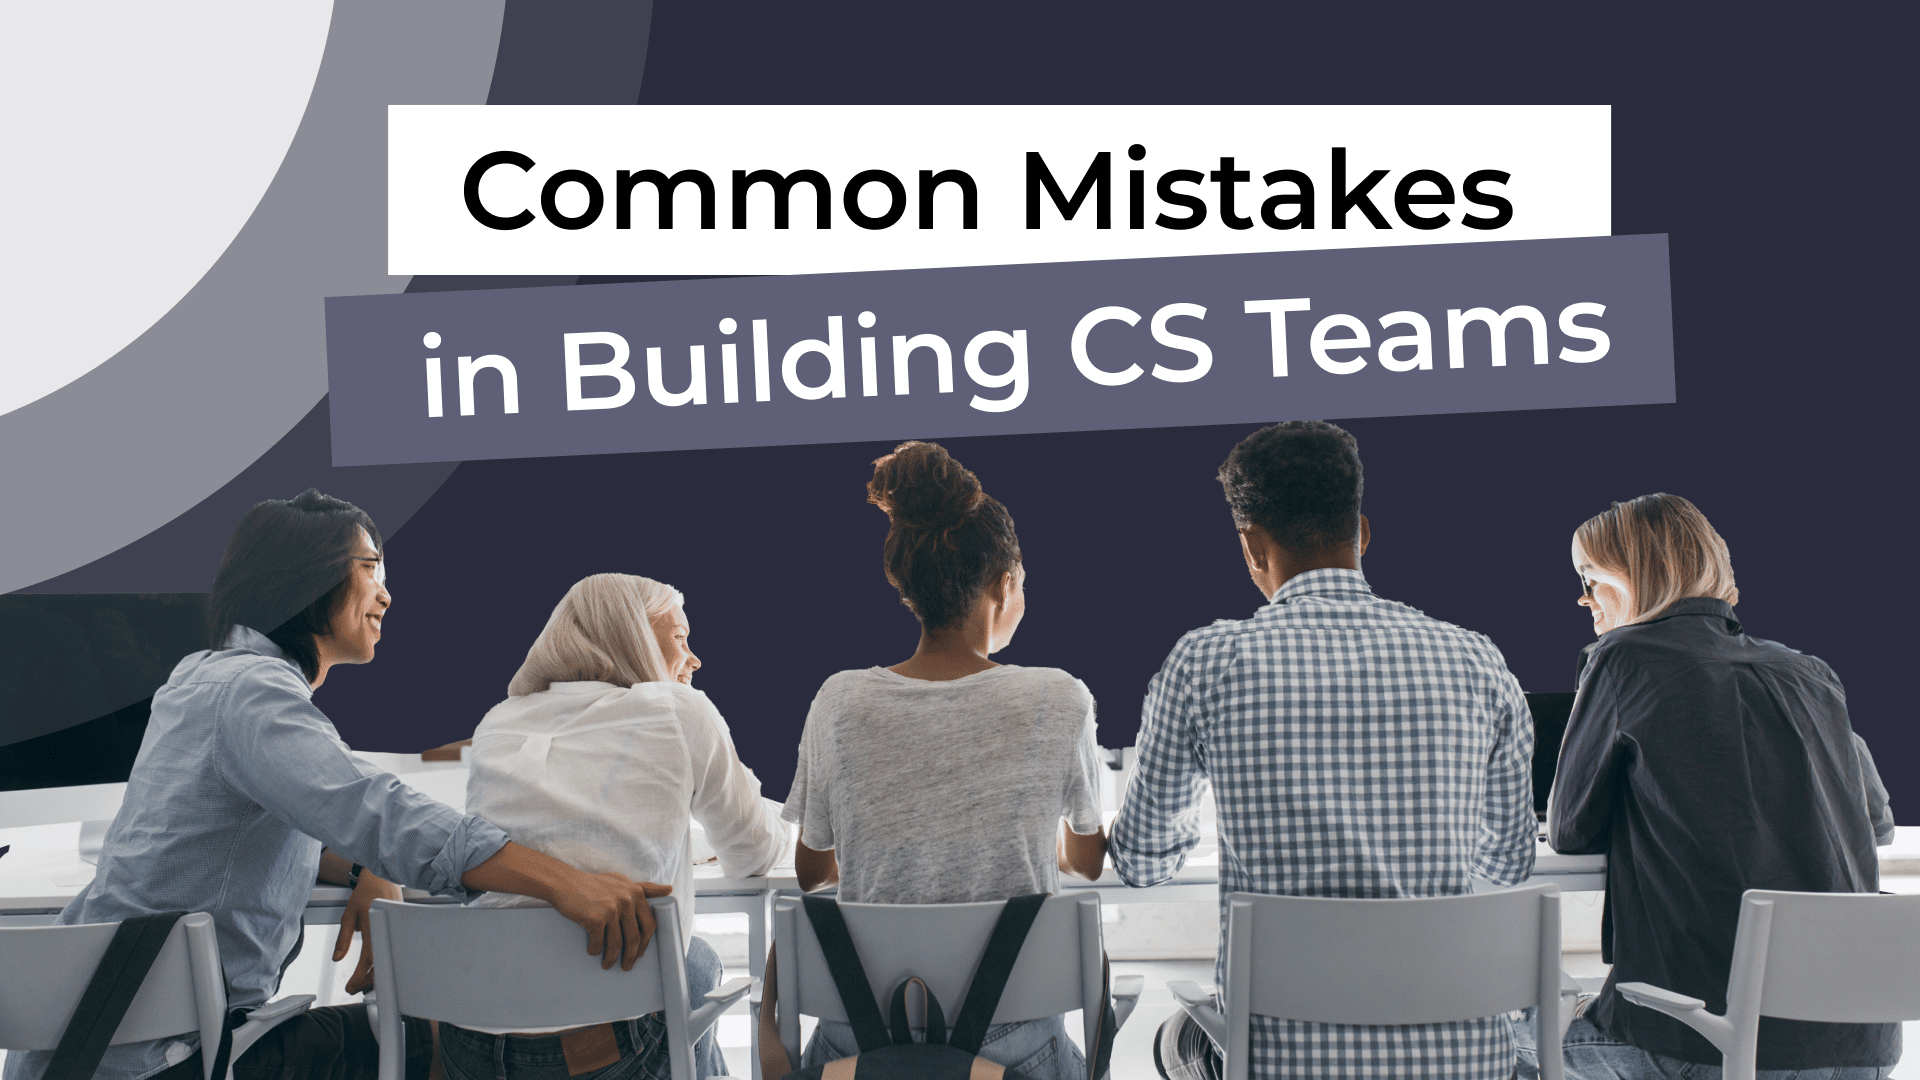 8 Common Mistakes When Building Customer Success Teams